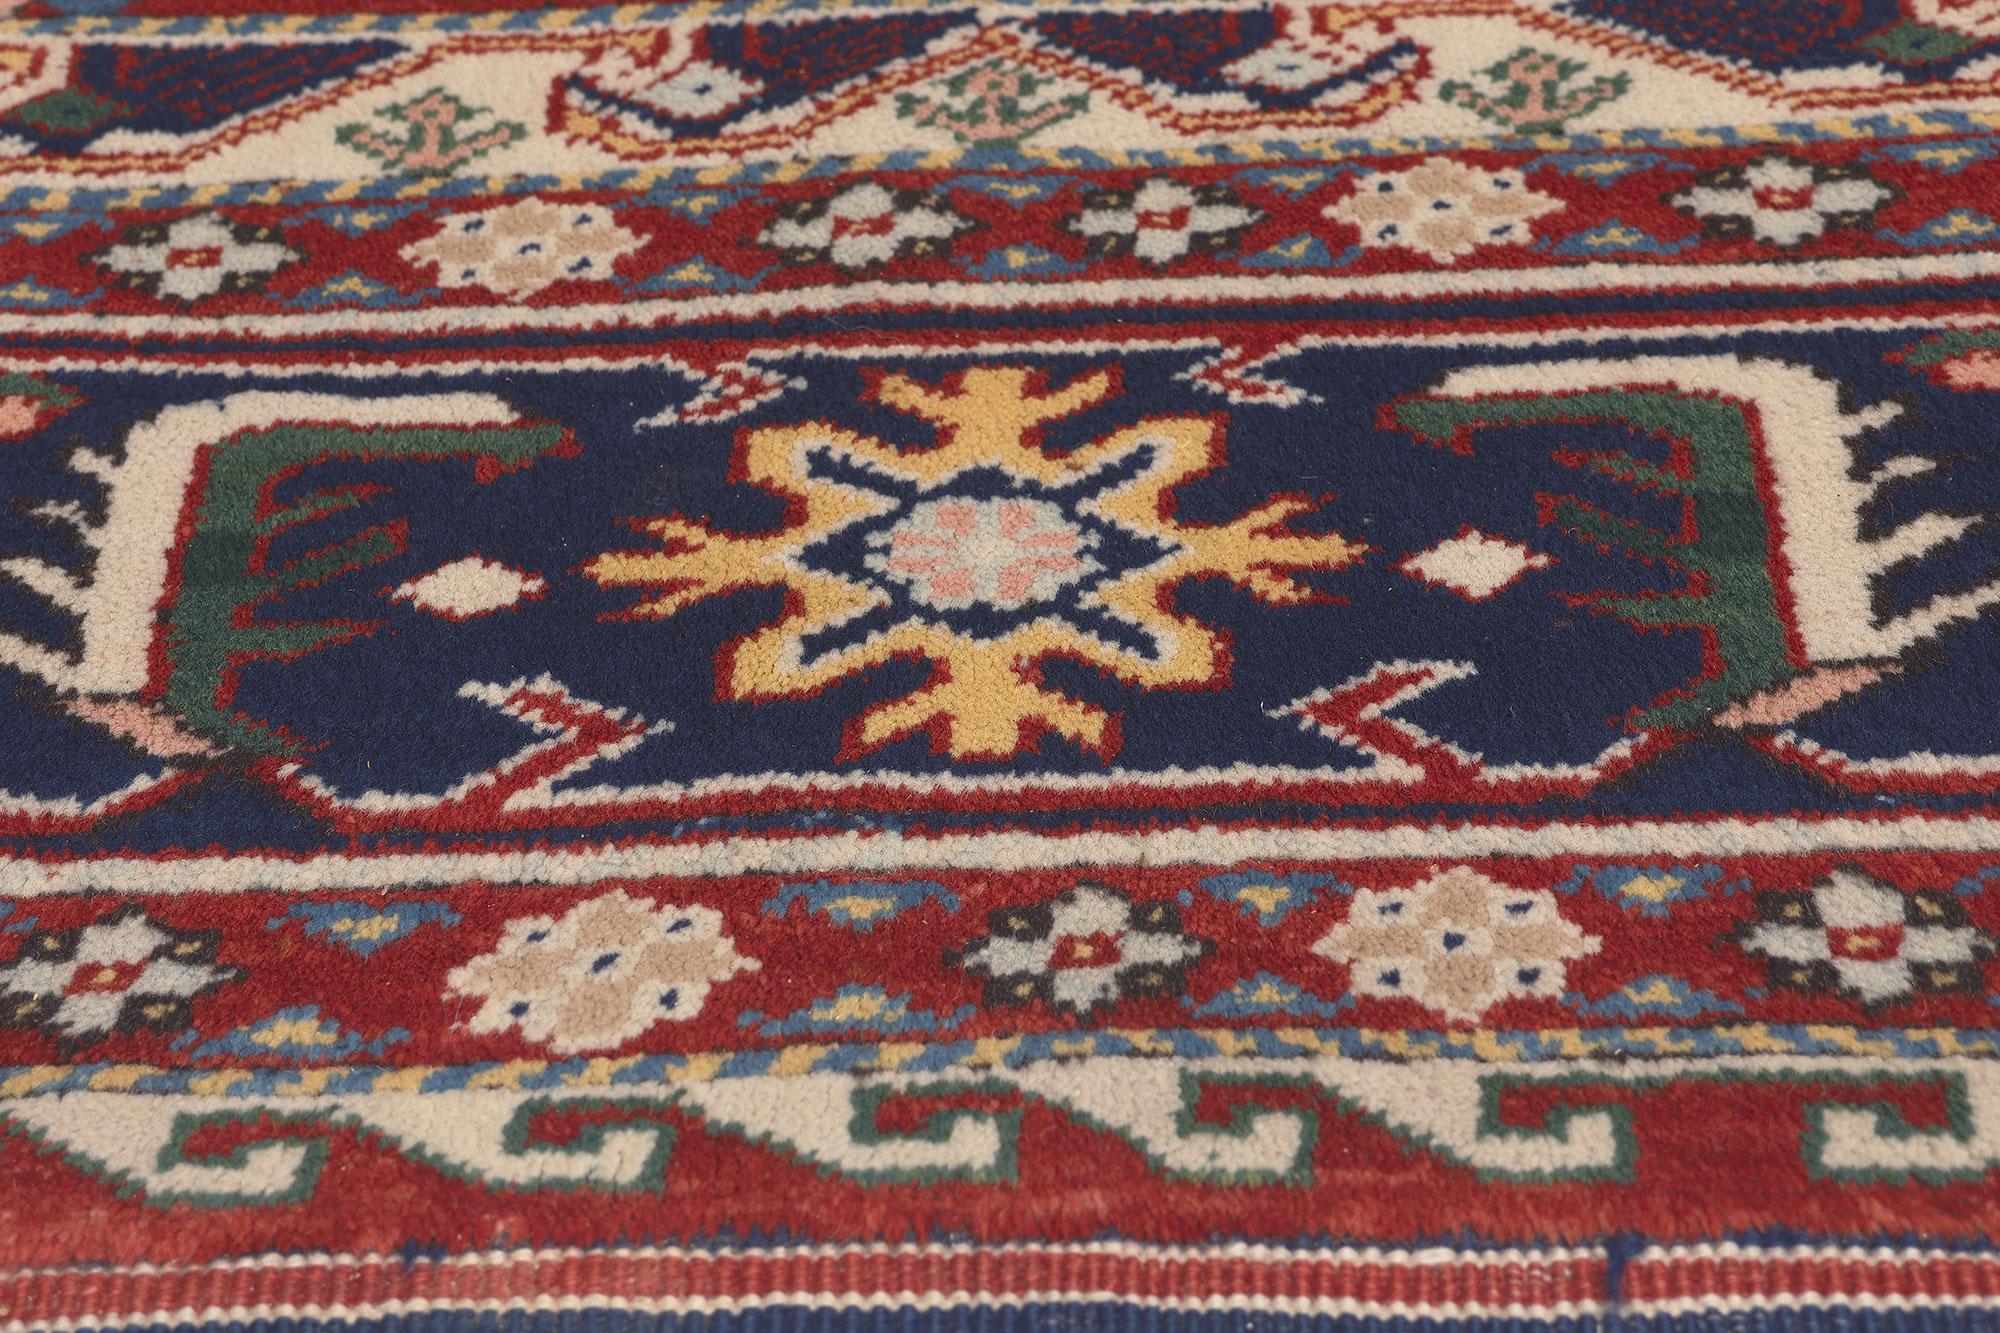 Vintage Turkish Oushak Rug, Patriotic Flair Meets Nomadic Charm In Good Condition For Sale In Dallas, TX